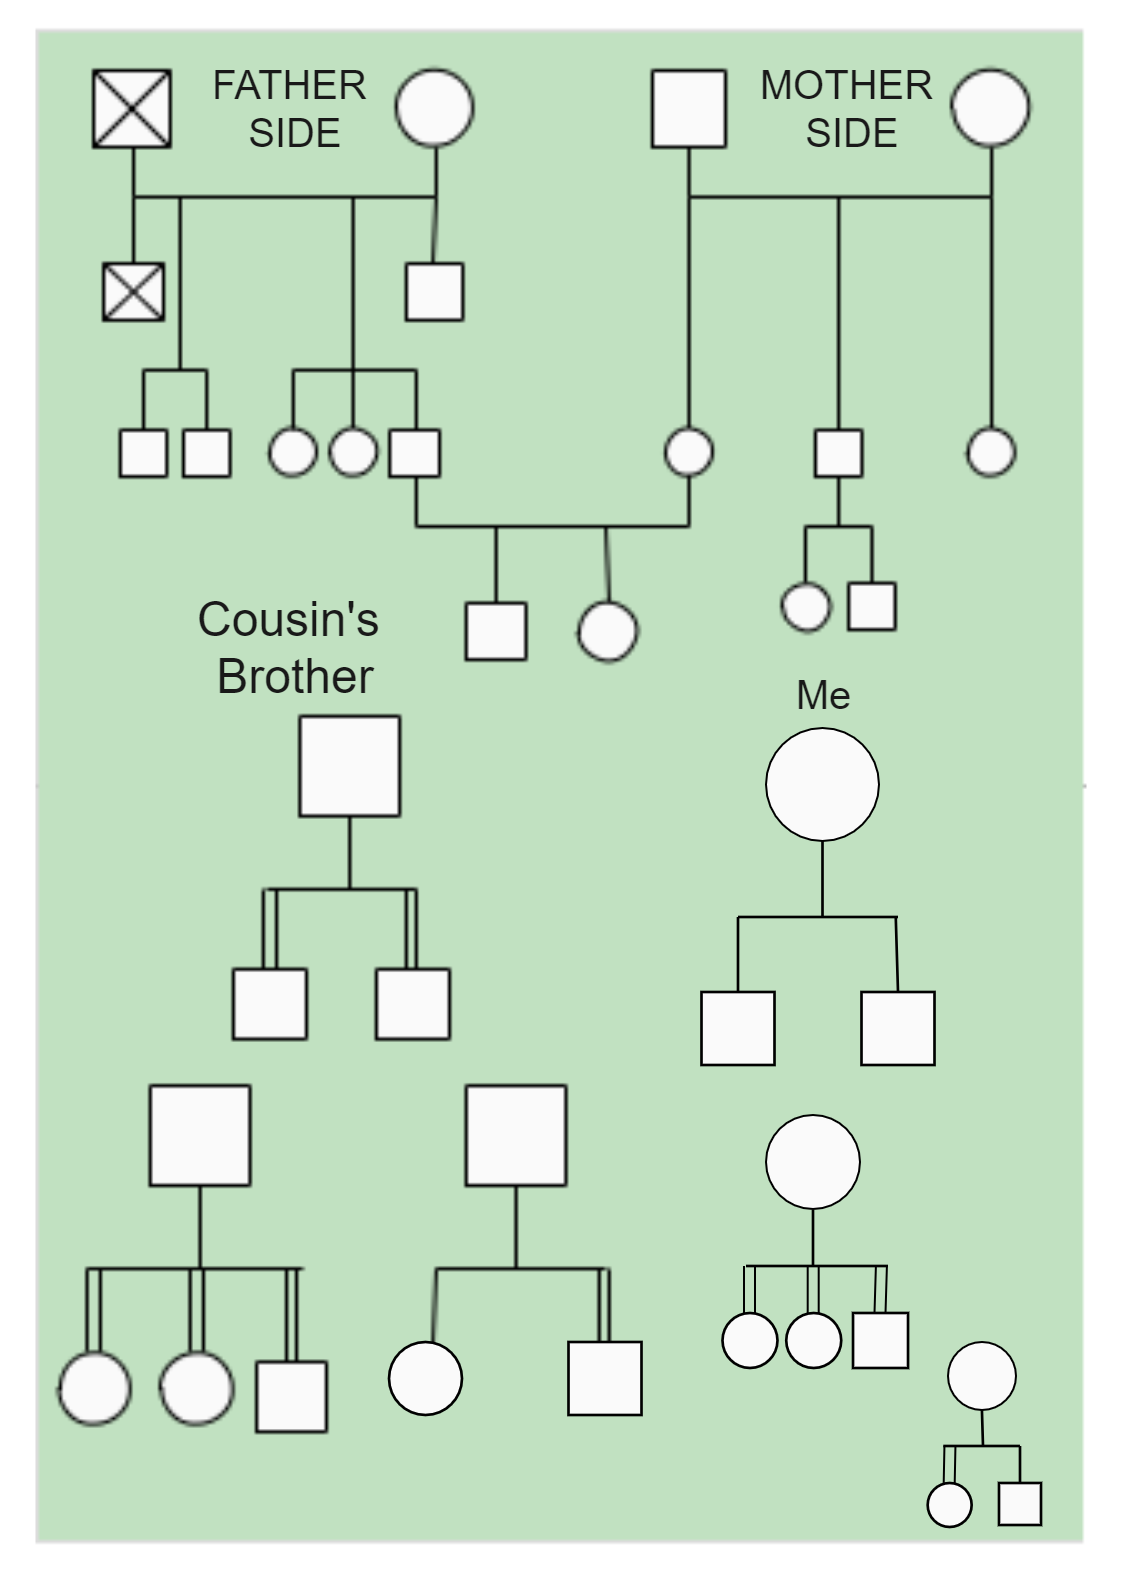 Personal family tree genogram with both sides is shown below. A genogram is made up of simple symbols that signify gender and different lines that depict familial links. Some genogram users also draw circles around family members who share living quarters